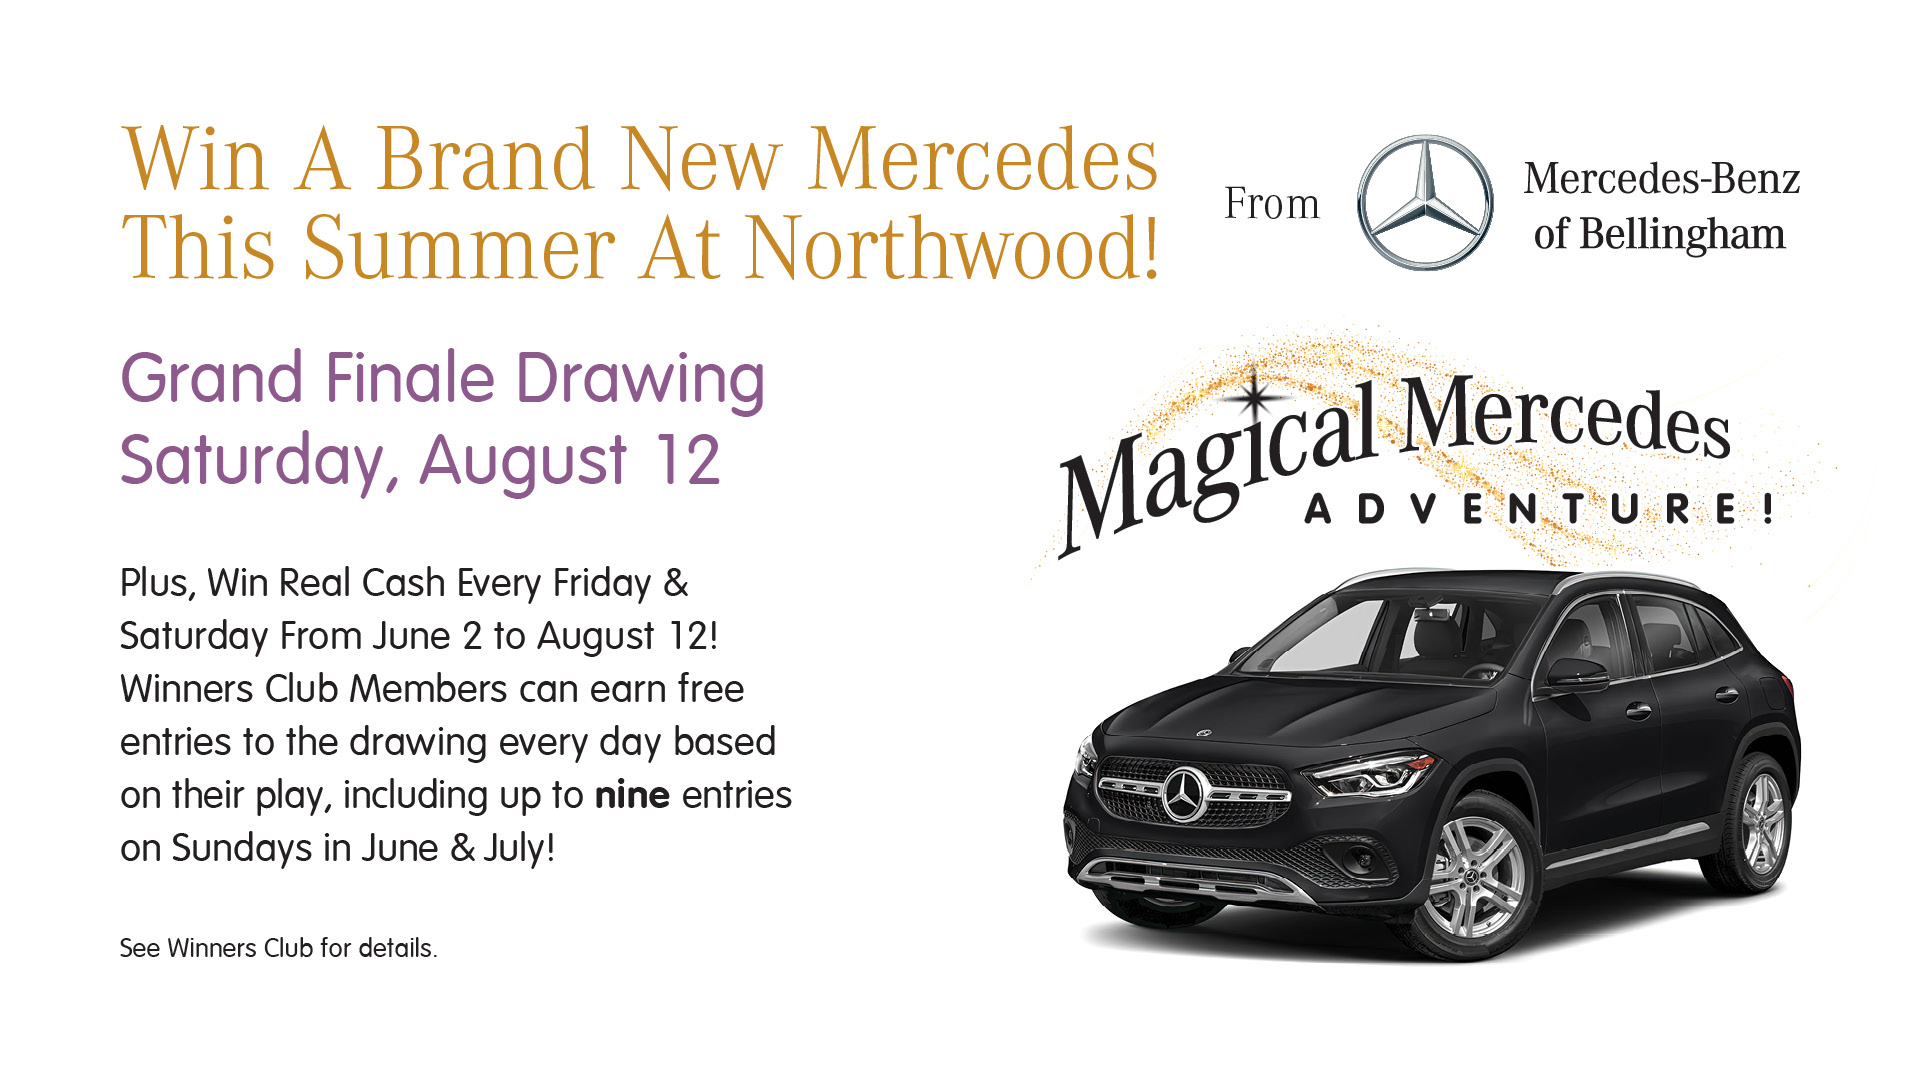 Magical Mercedes Adventure - Win a brand new Mercedes this summer at Northwood! From Mercedes-Benz of Bellingham. Grand Finale drawing Saturday, August 12. Plus, win real cash every Friday & Saturday from June 2 to August 12! Winners Club members can earn free entries to the drawing every day based on their play, including up to nine entries on Sundays in June & July! See Winners Club for details.